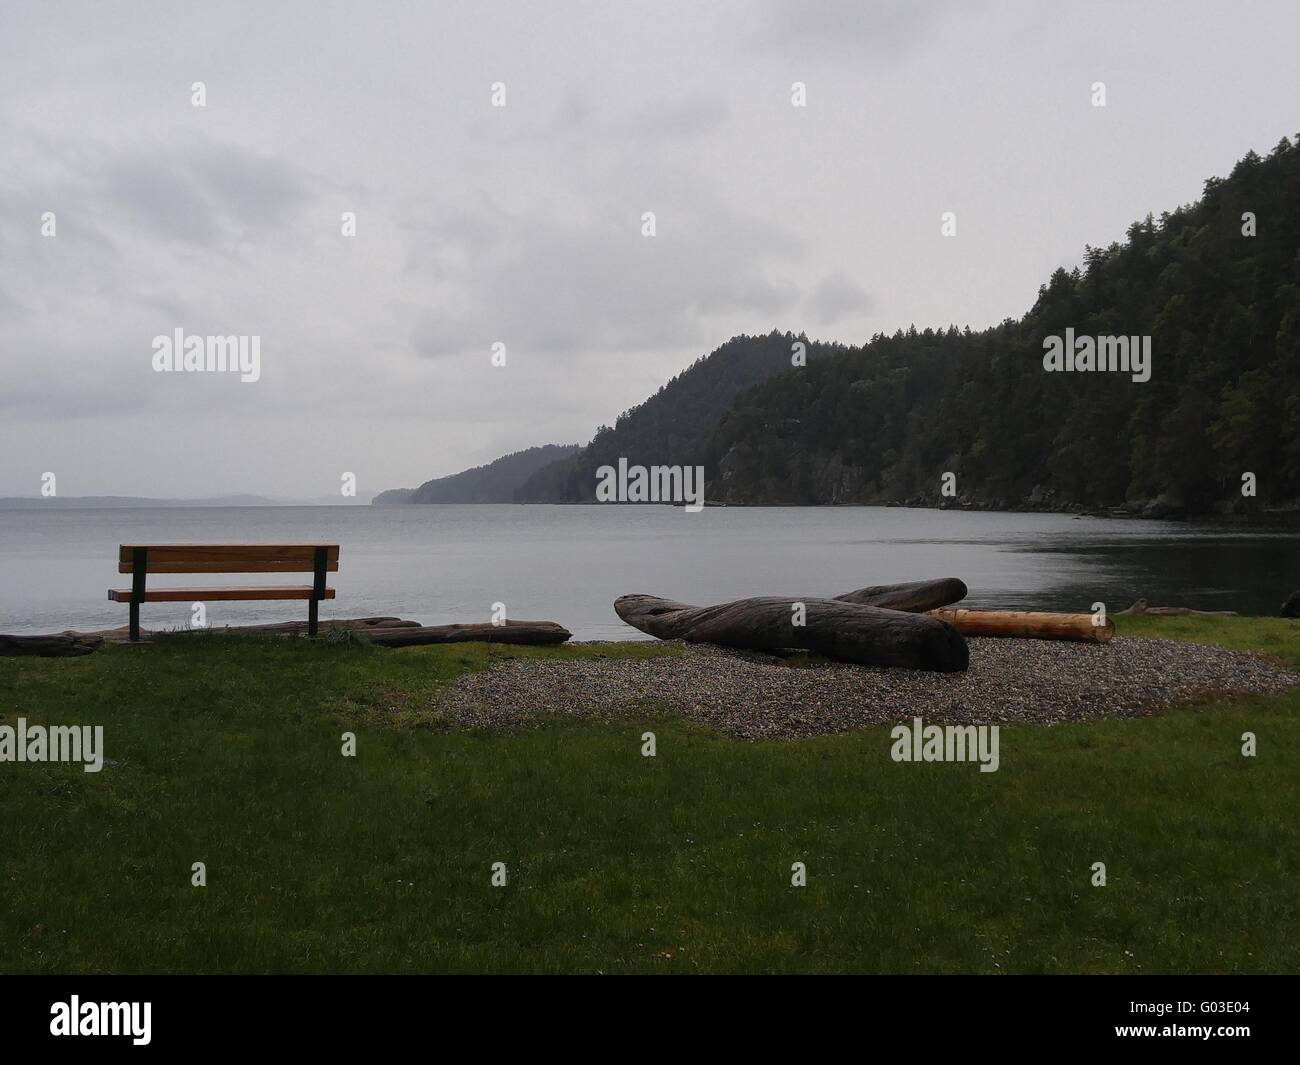 Misty winter day on the Pacific Coast with shoreline and inviting bench. Stock Photo